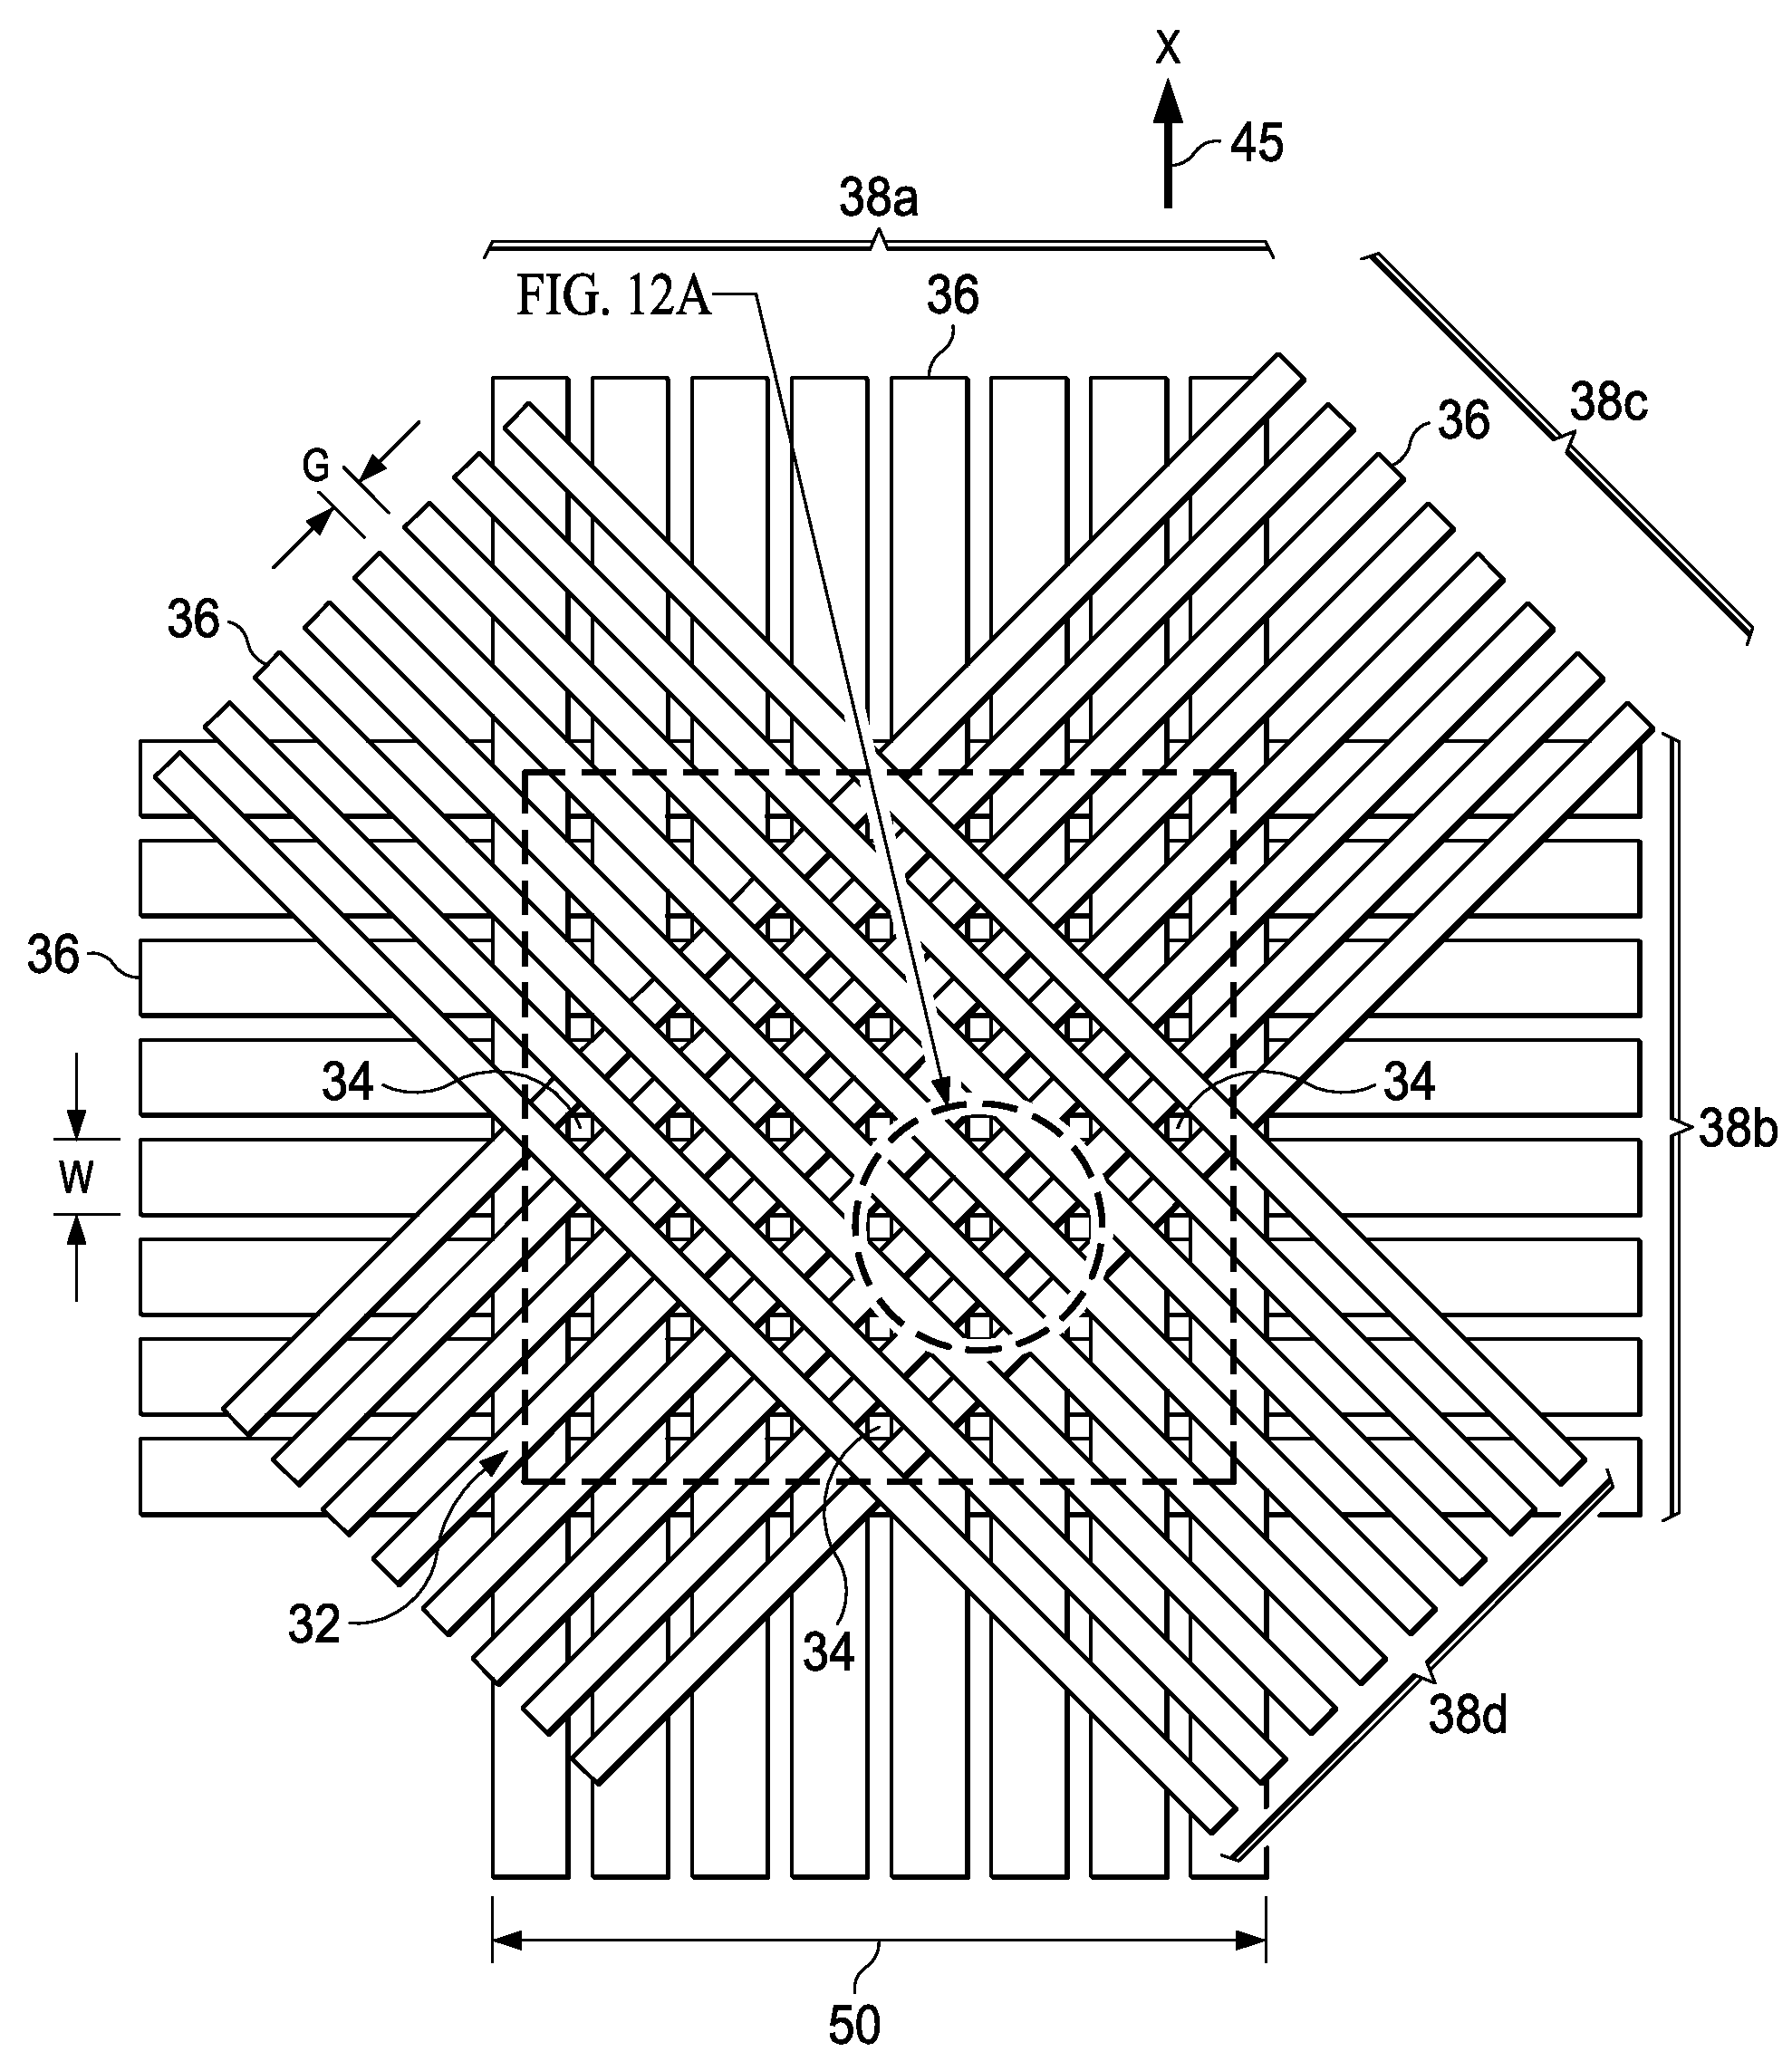 Composite Laminates Having Hole Patterns Produced by Controlled Fiber Placement